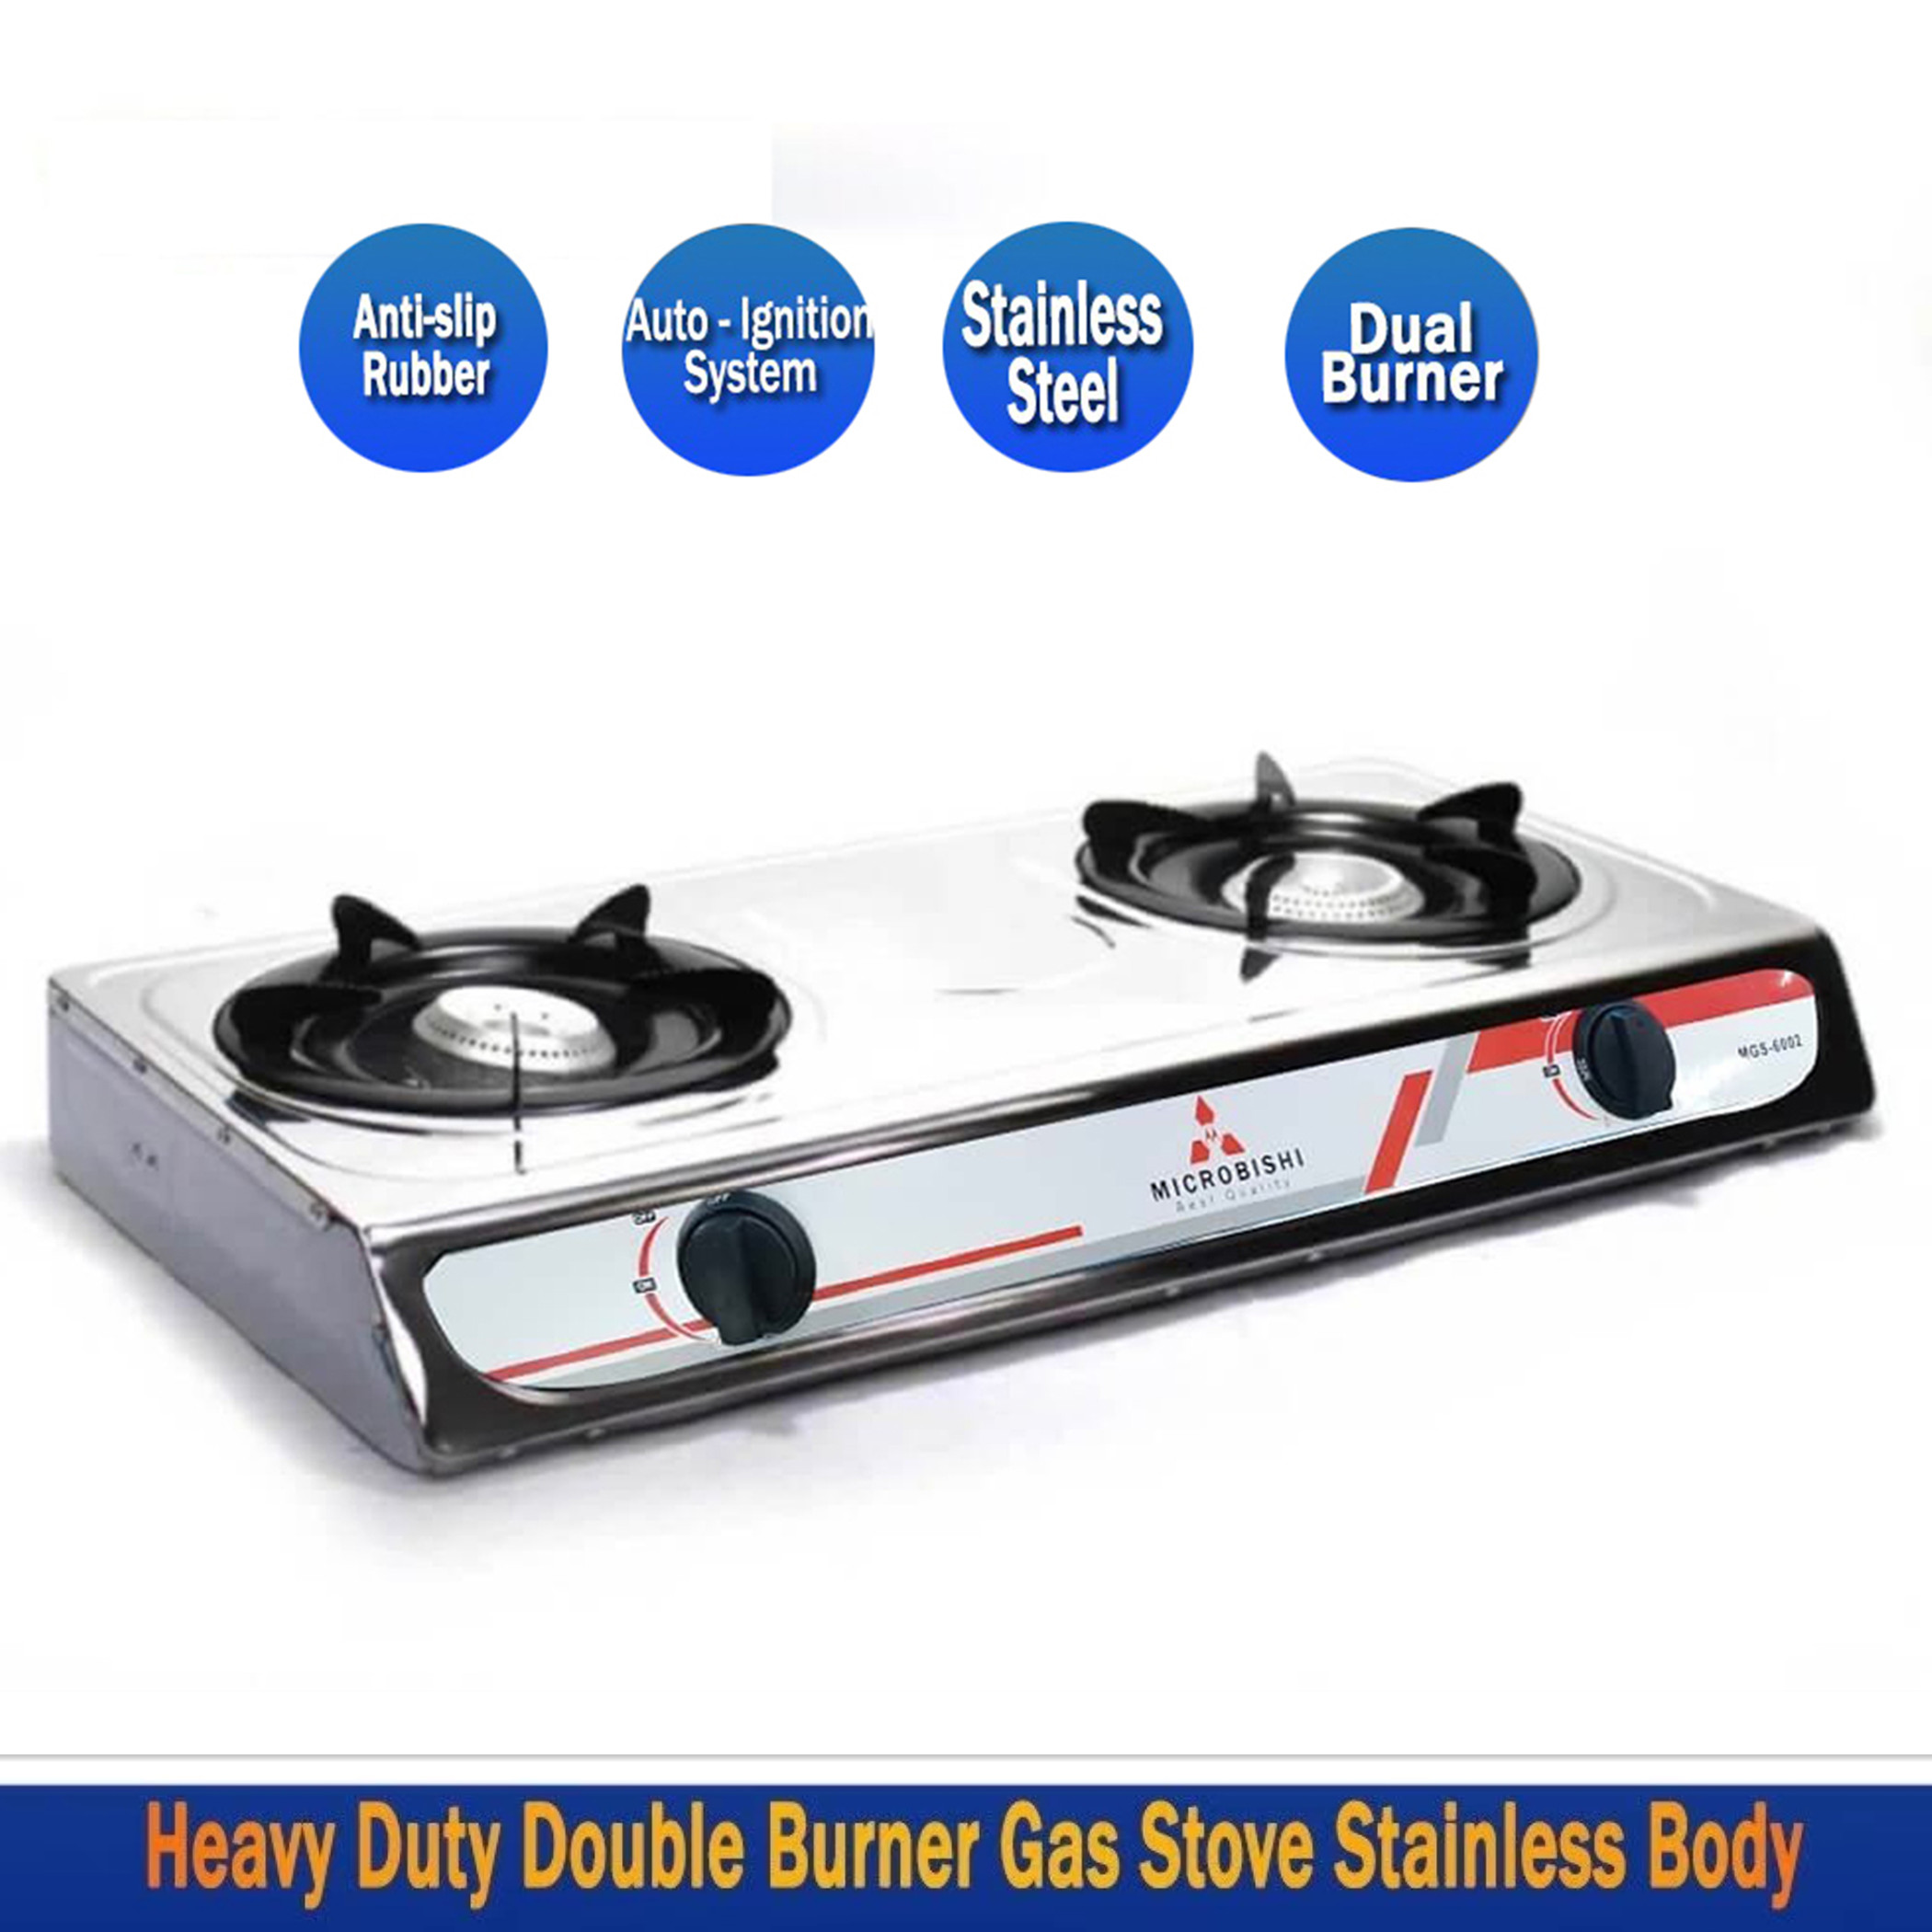 MASAYA/MICROBISHI Heavy Duty Stainless Gas Stove with Double Burner